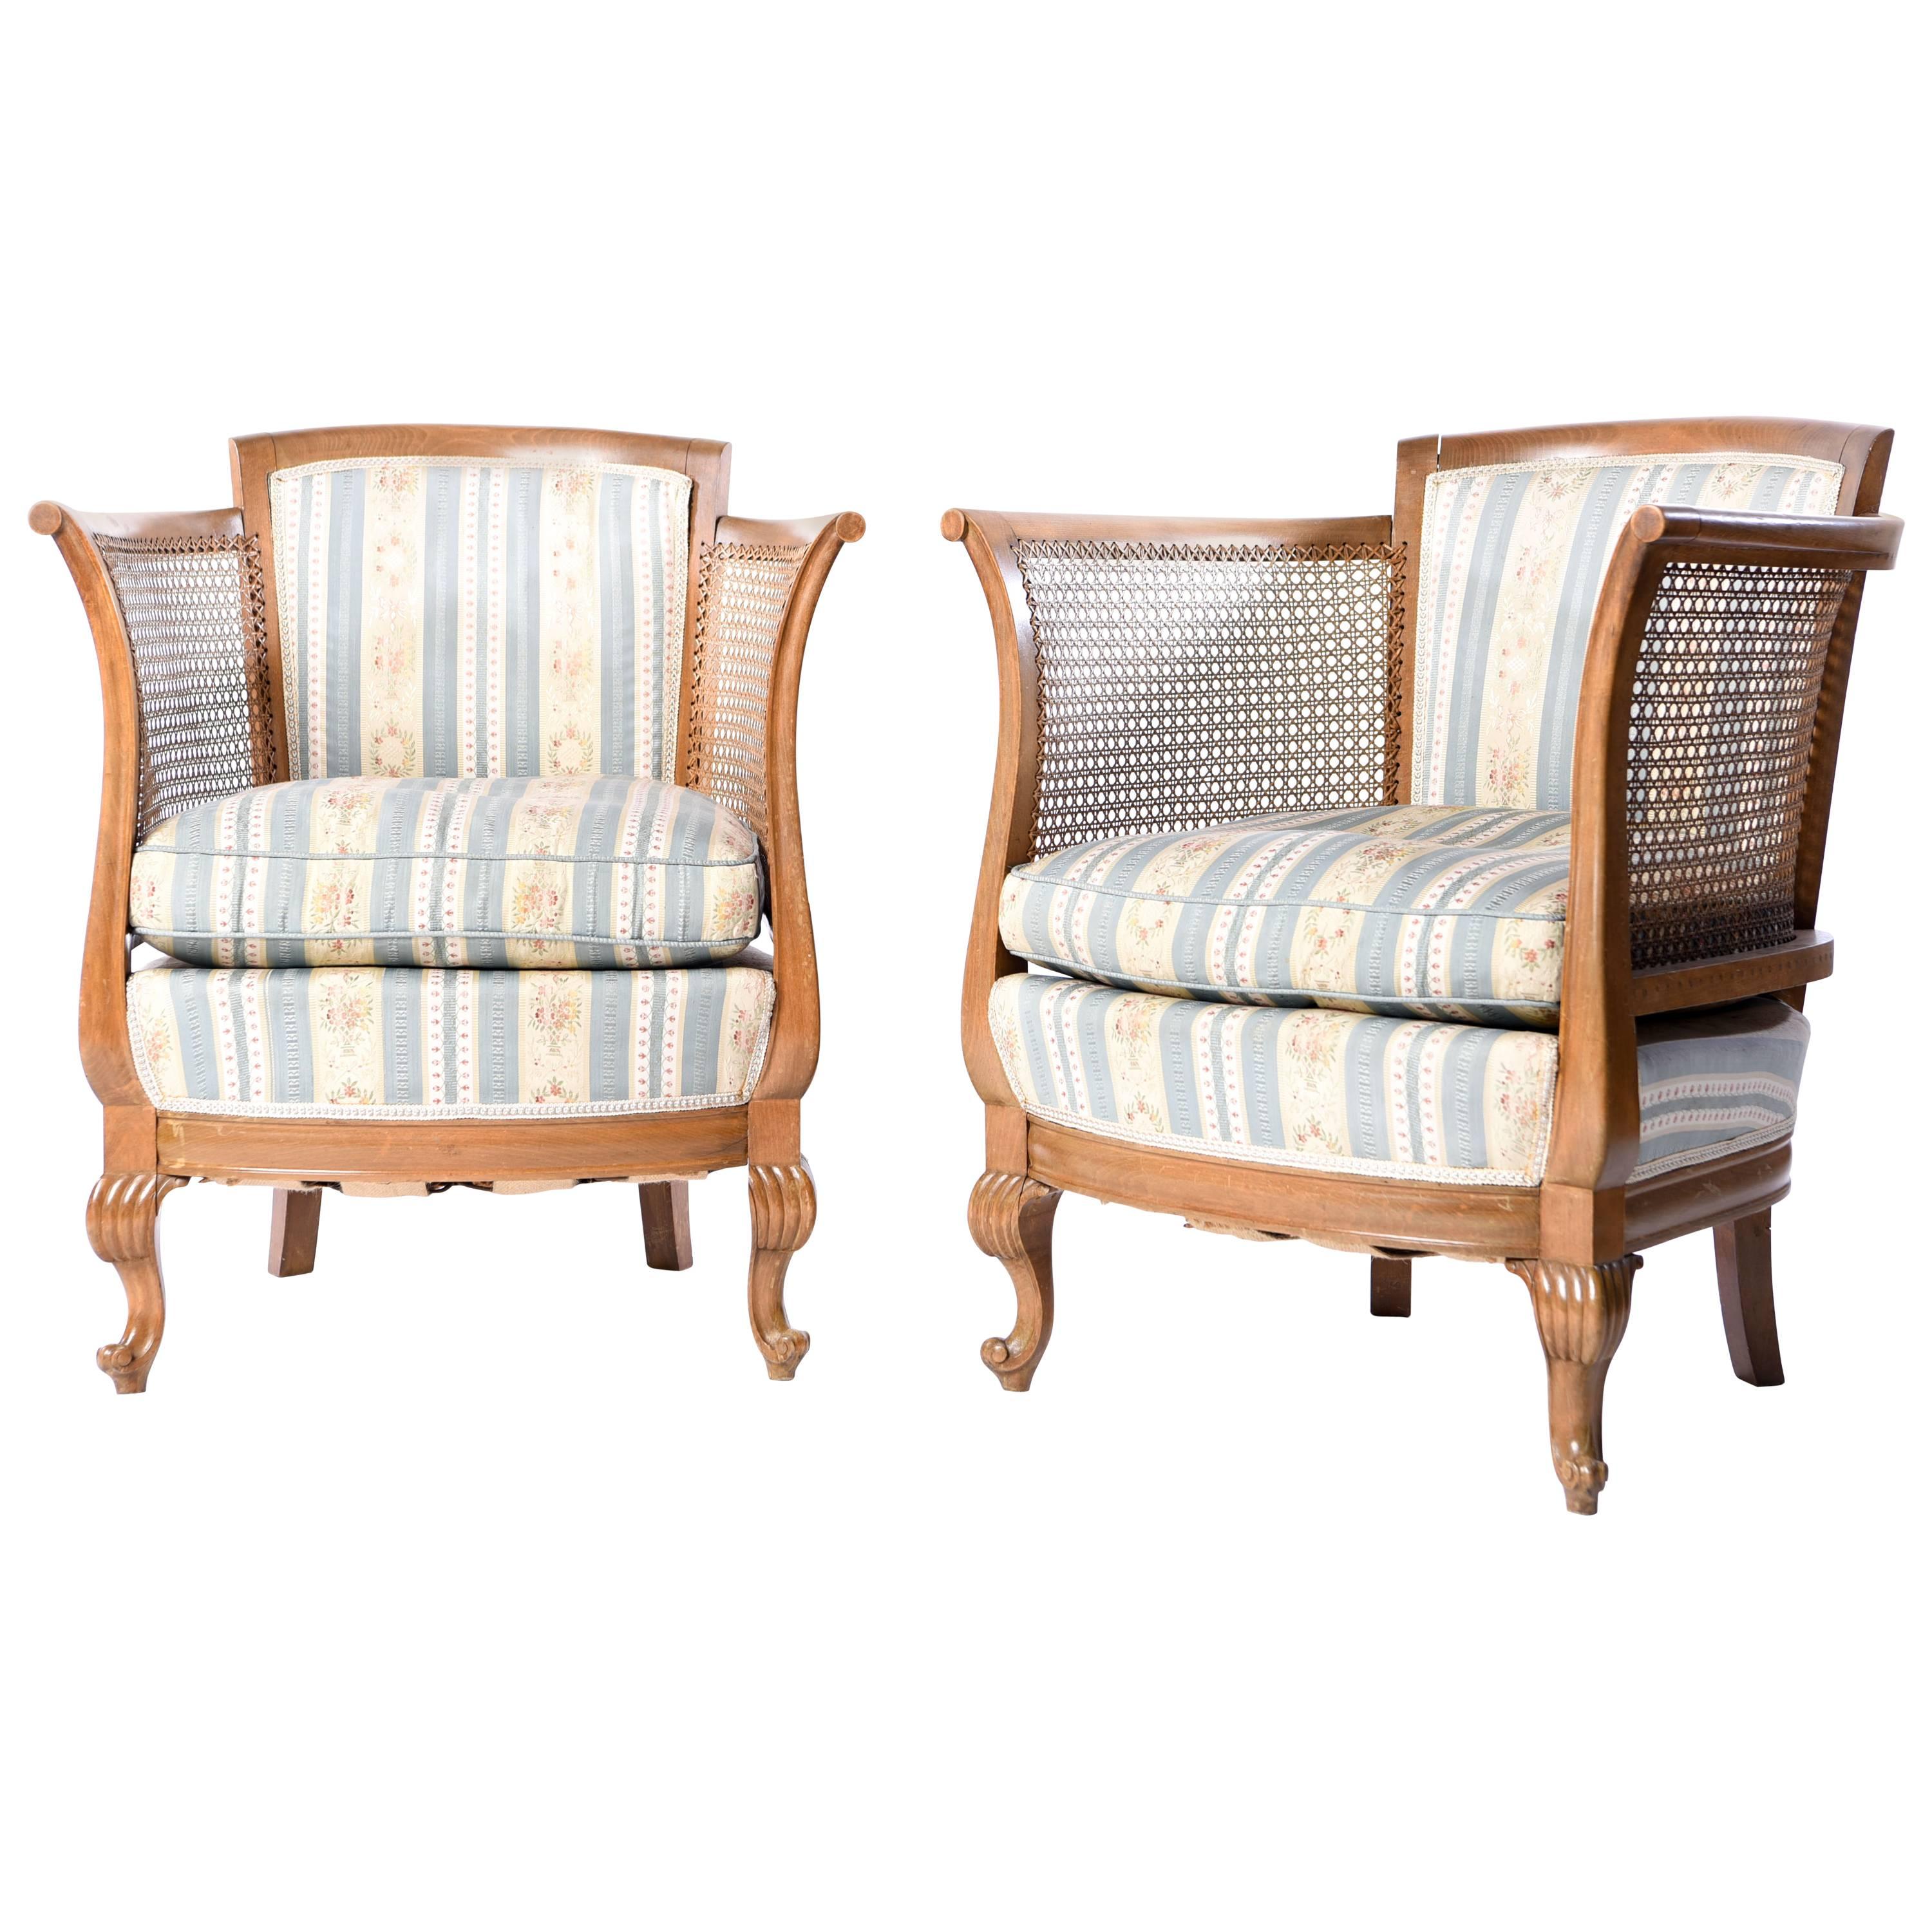 Pair of French Caned Bergere Chairs